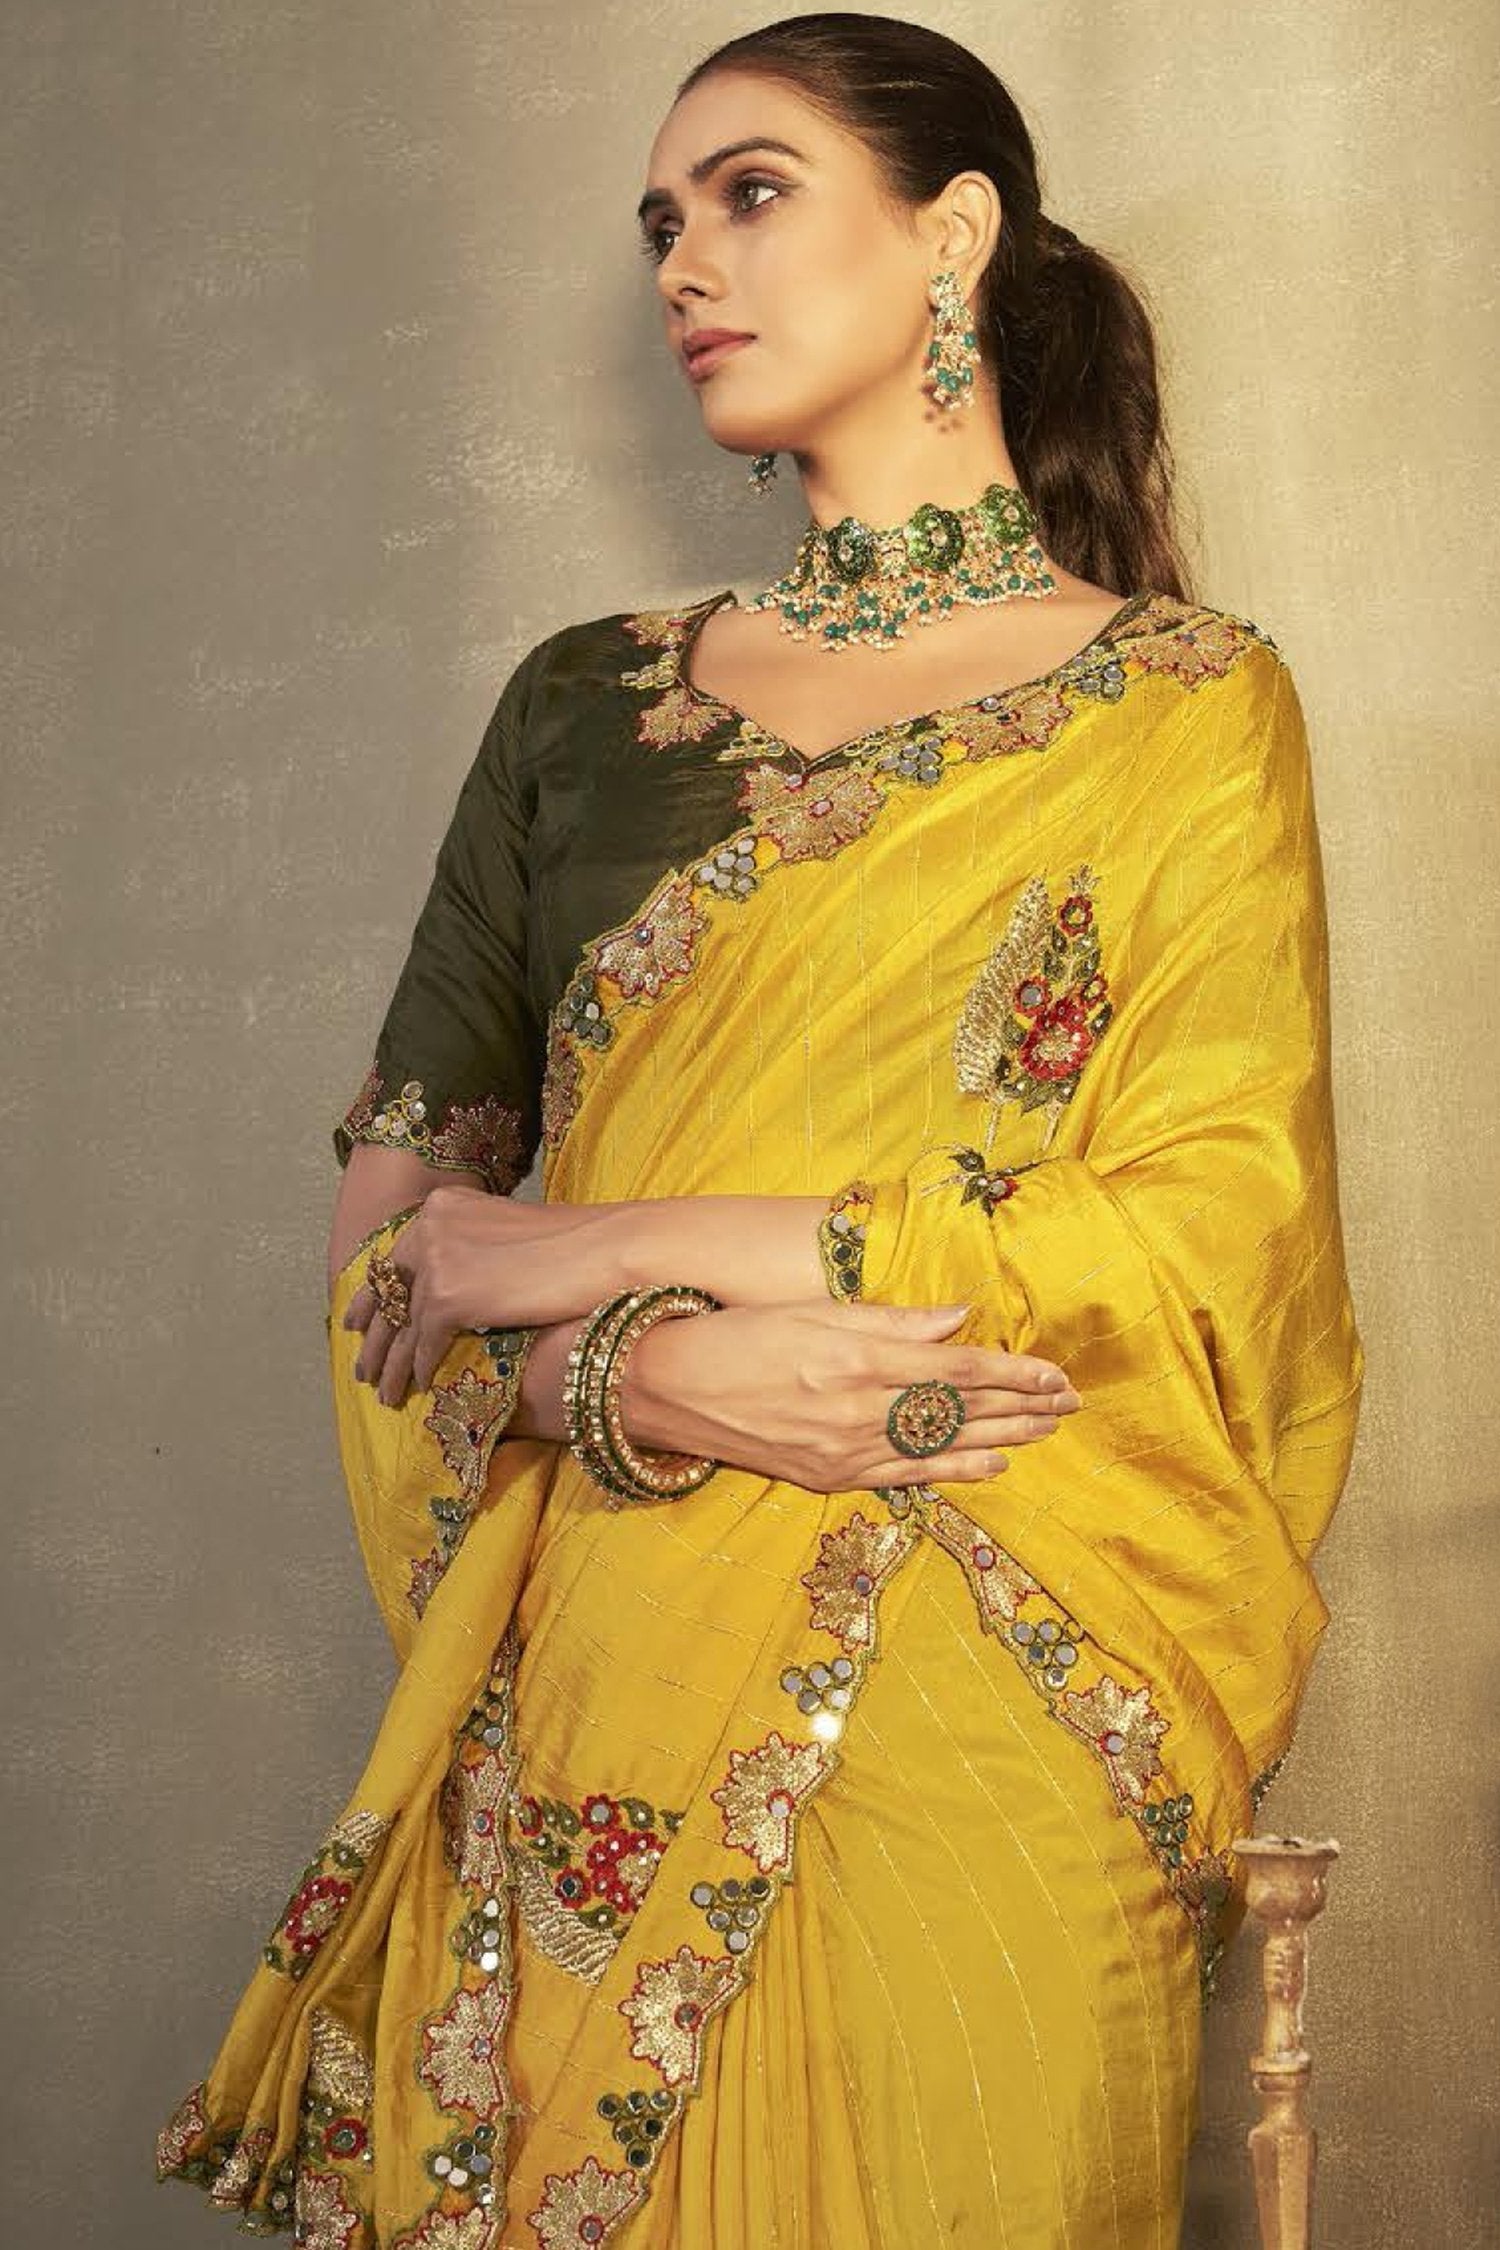 MySilkLove Sunset Pearl Yellow and Green Embroidered Silk Saree with Designer Blouse